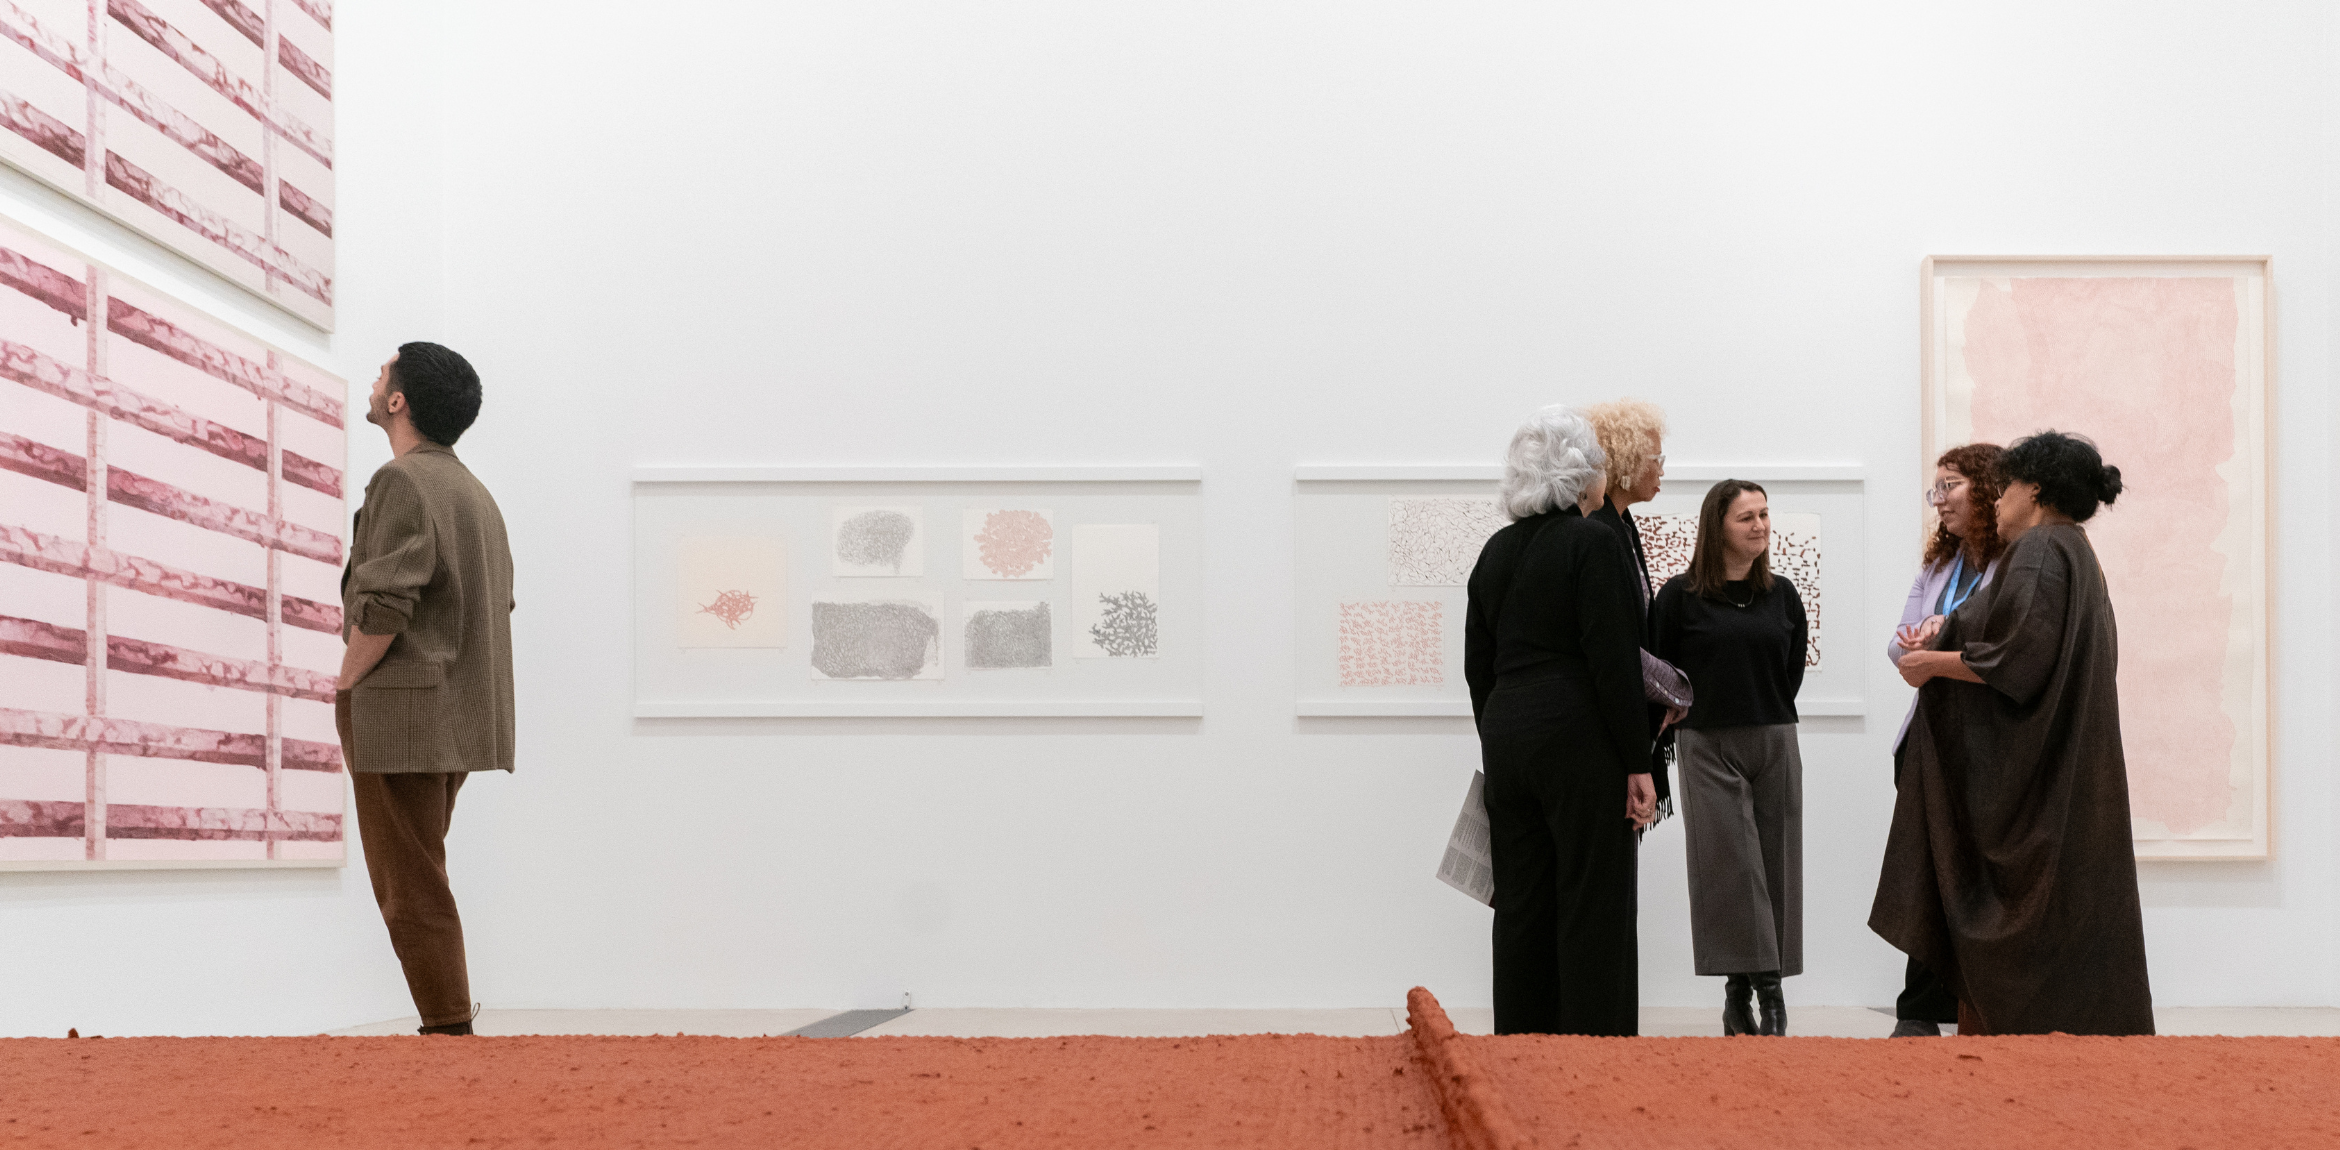 People in an art gallery viewing and discussing various abstract artworks on the walls. One man stands alone examining a large piece on the left, while a group of women are engaged in conversation near the center. The floor is covered with a textured, reddish-brown material, adding to the exhibition's aesthetic.